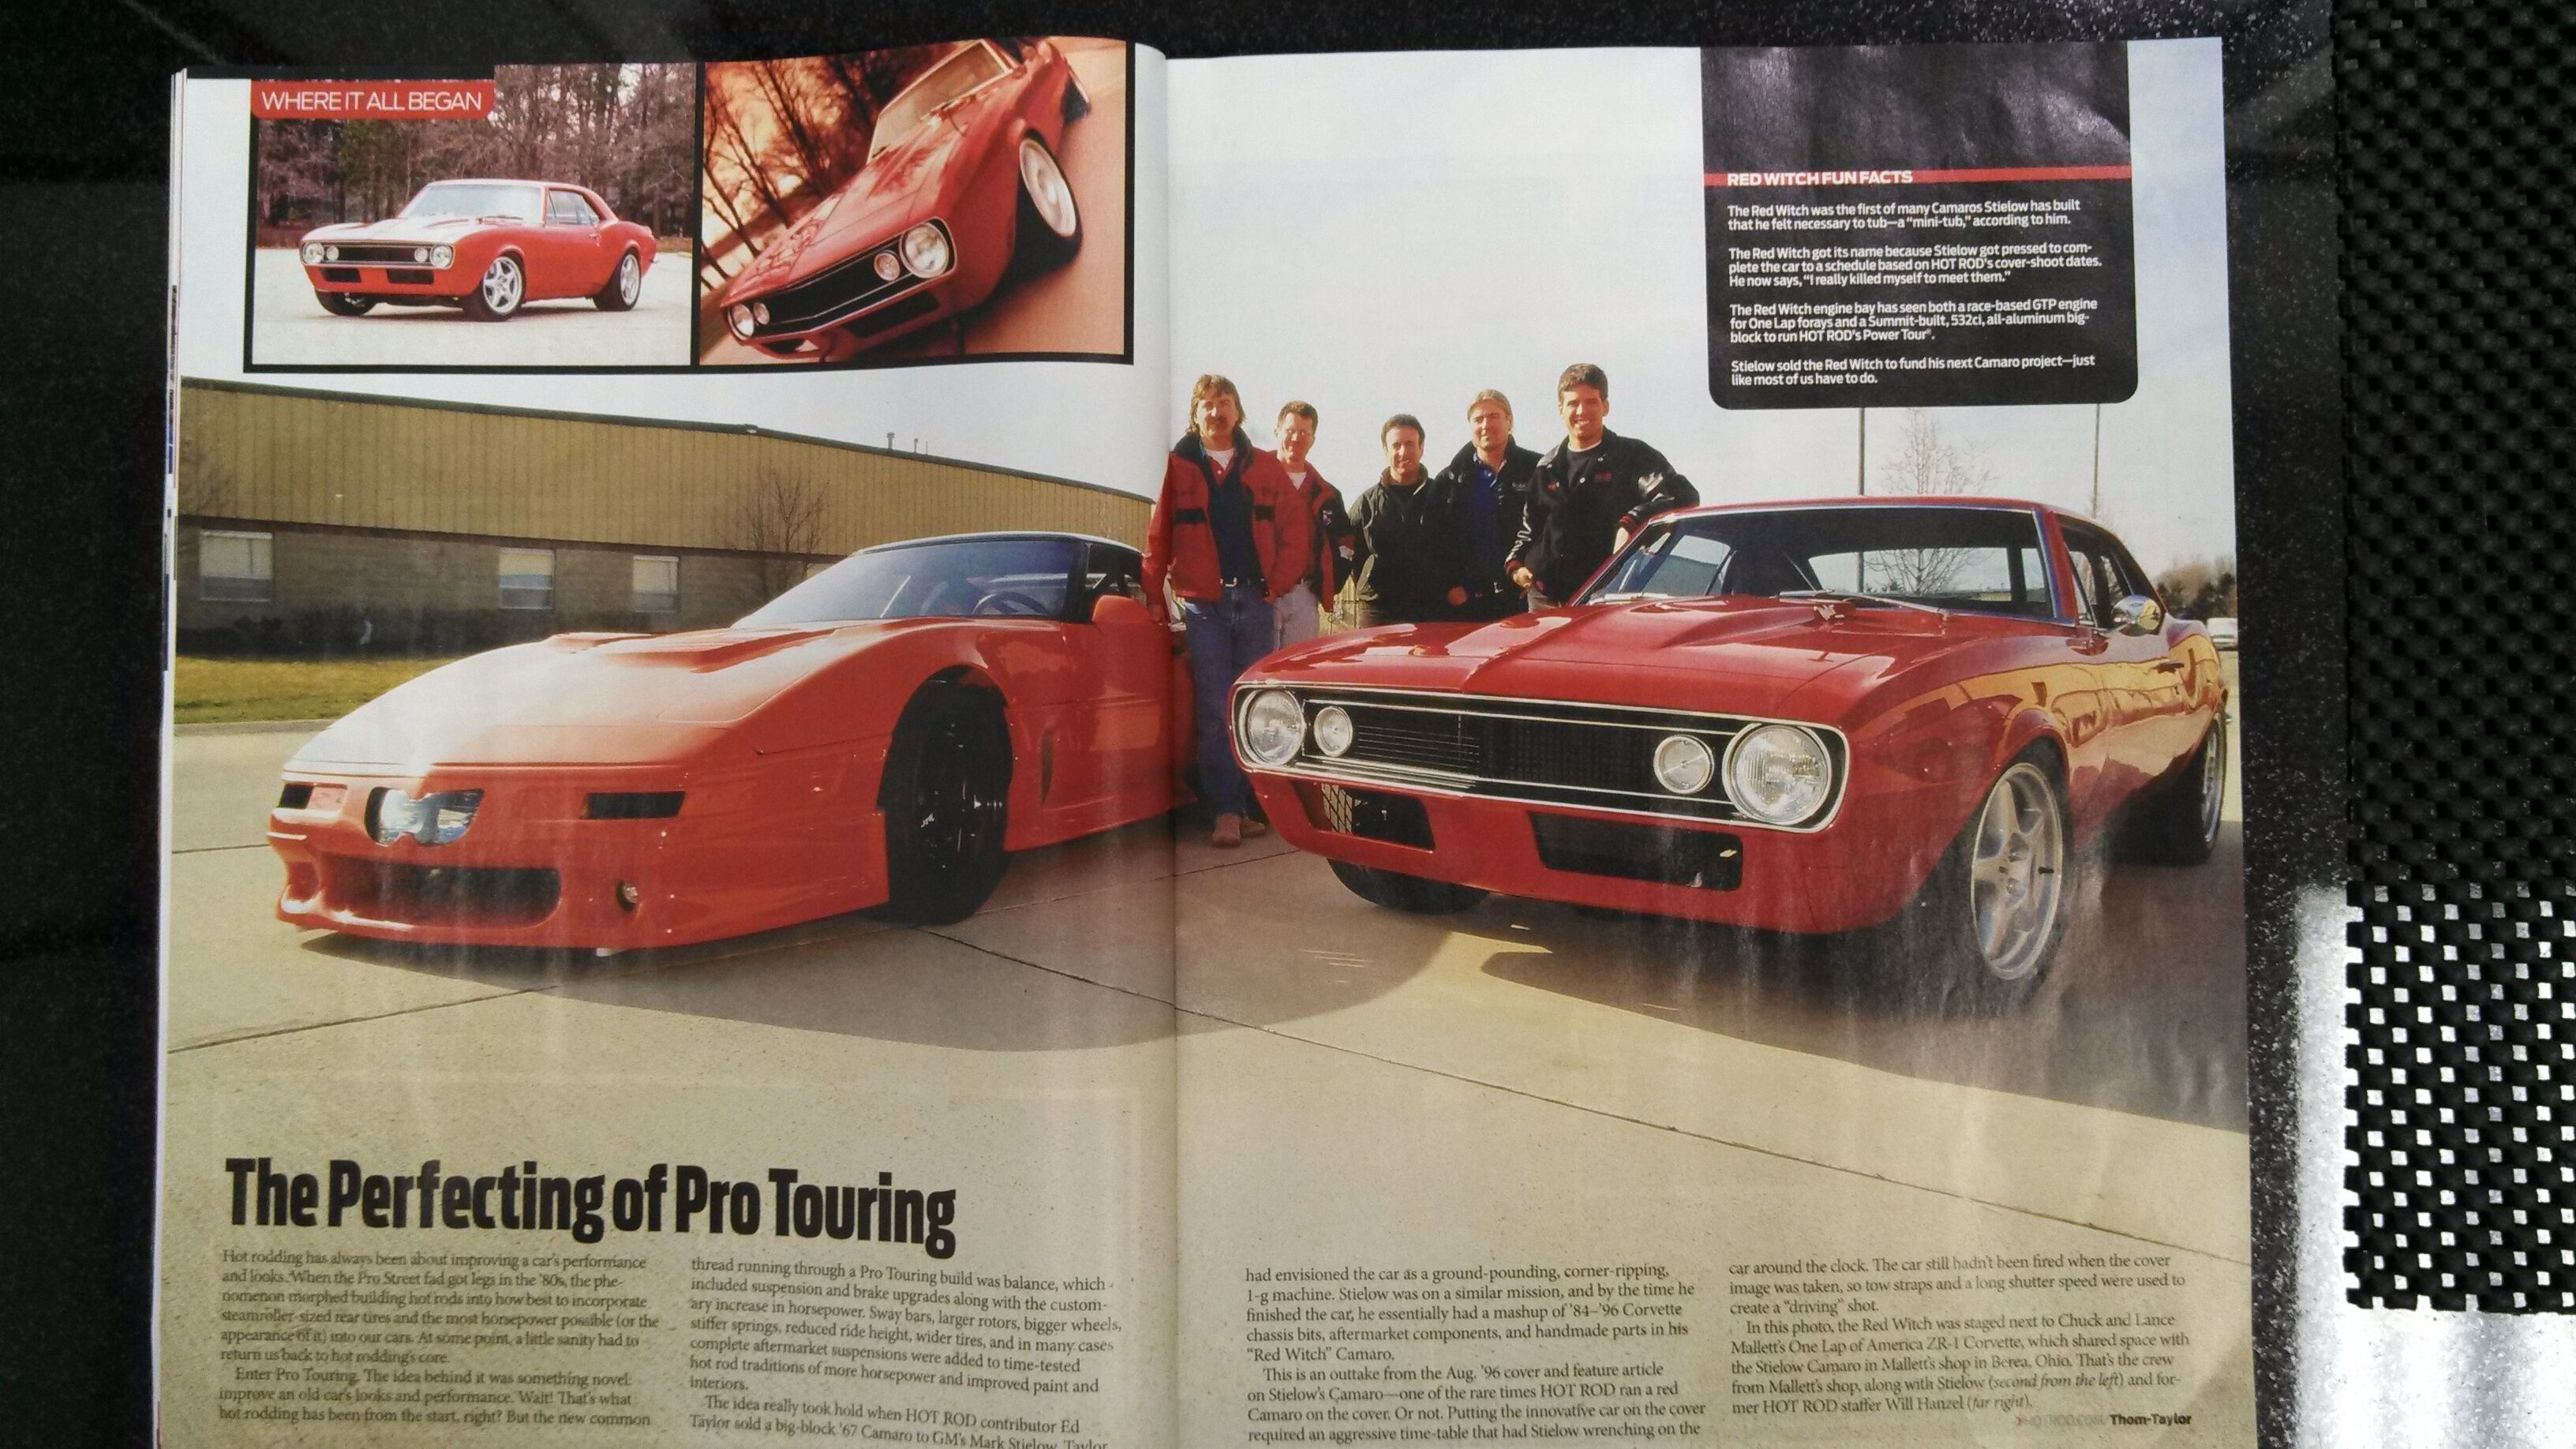 TBT: 1967 Camaro named Hot Rod Car of the Year 1996